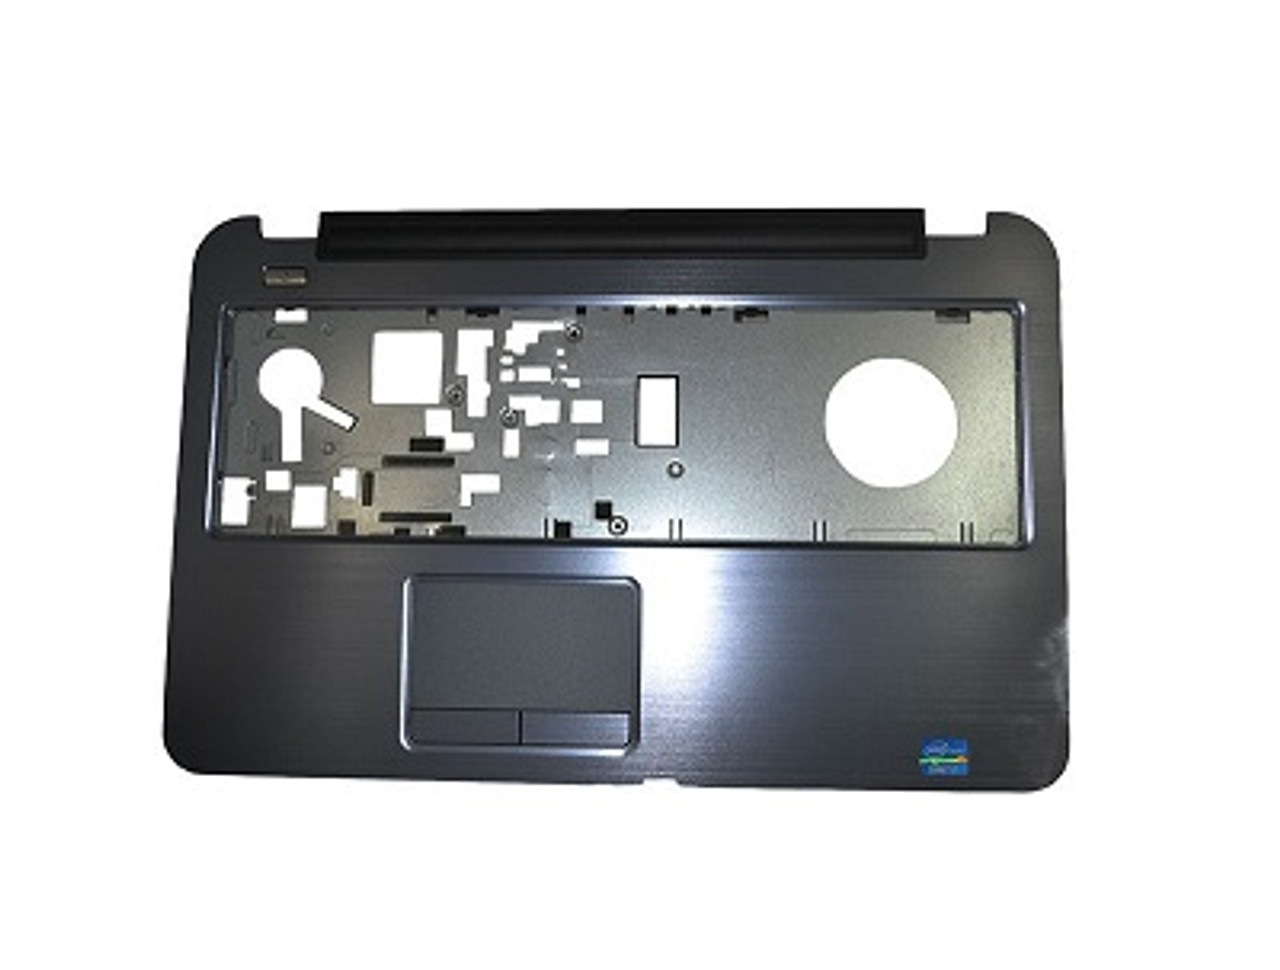 42T3671 - IBM US English Keyboard for x200 x200s x200 Tablet